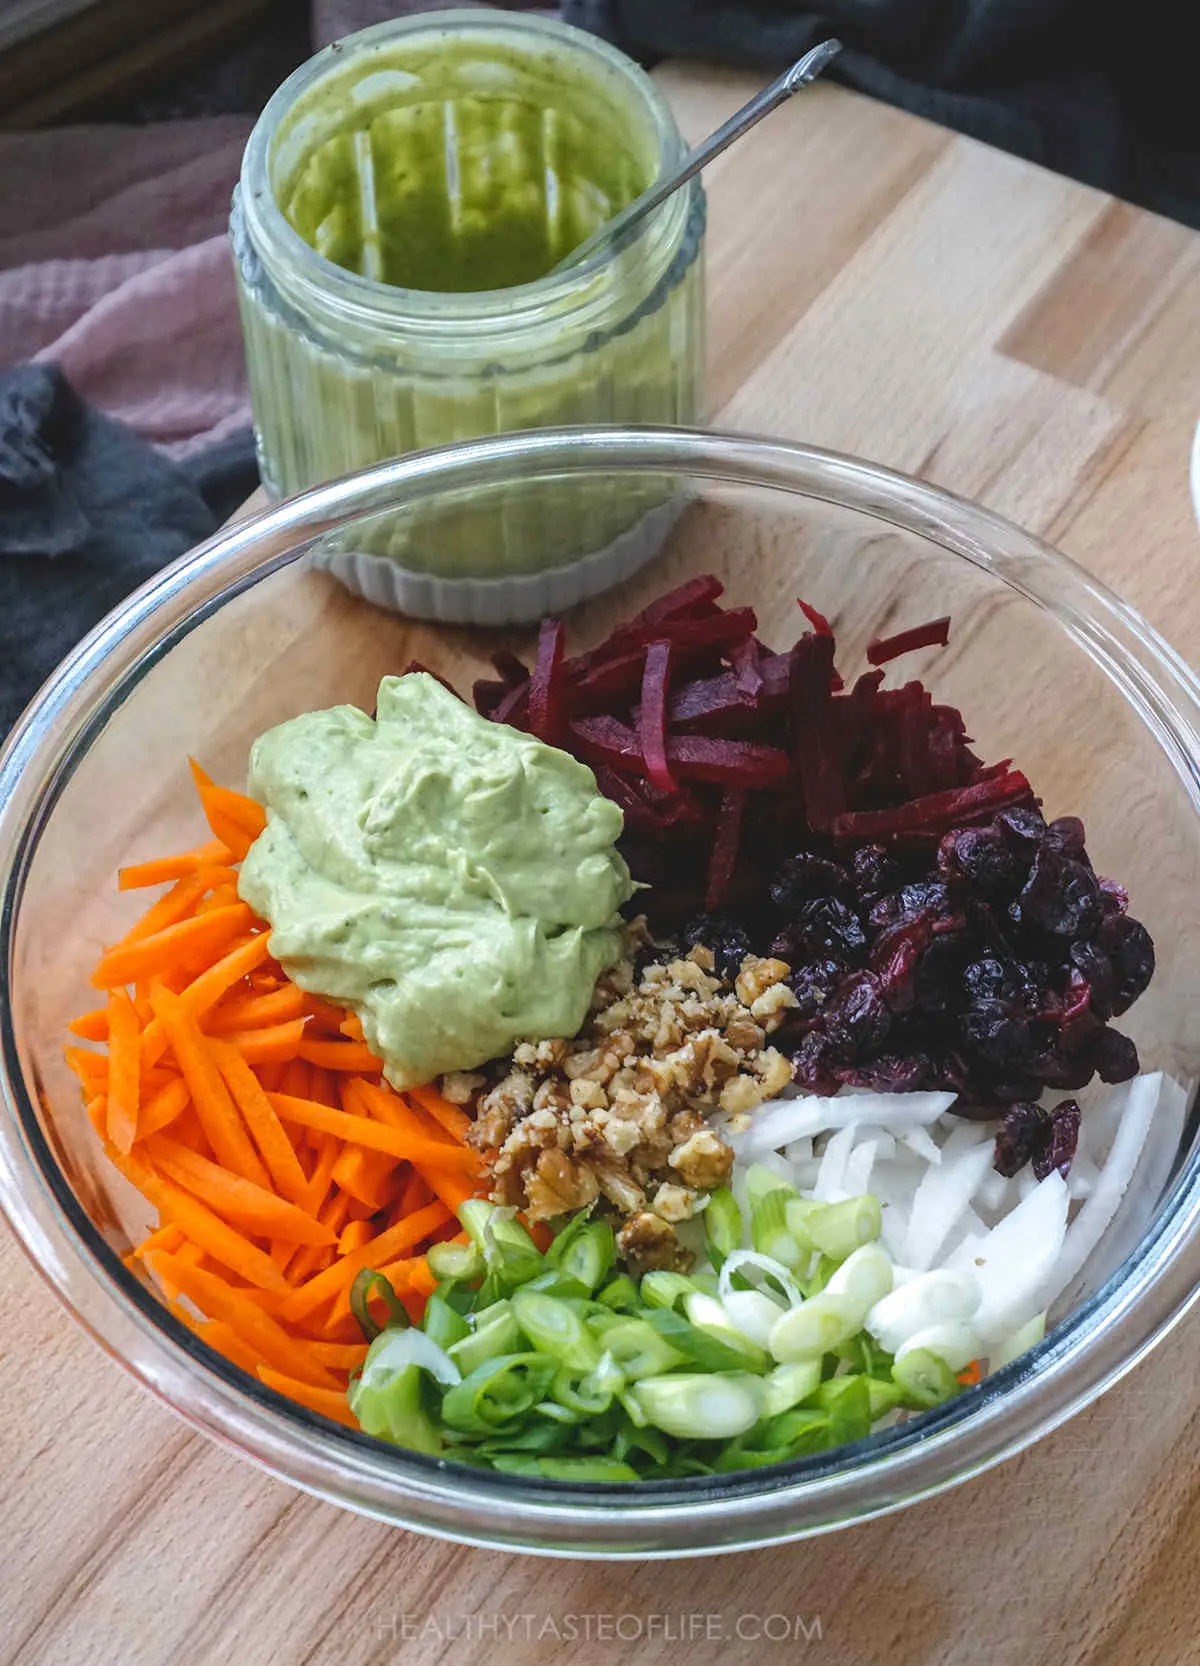 Ingredients for beet salad in a bowl: beetroot, carrots, radish, scallions, walnuts and avocado dressing.